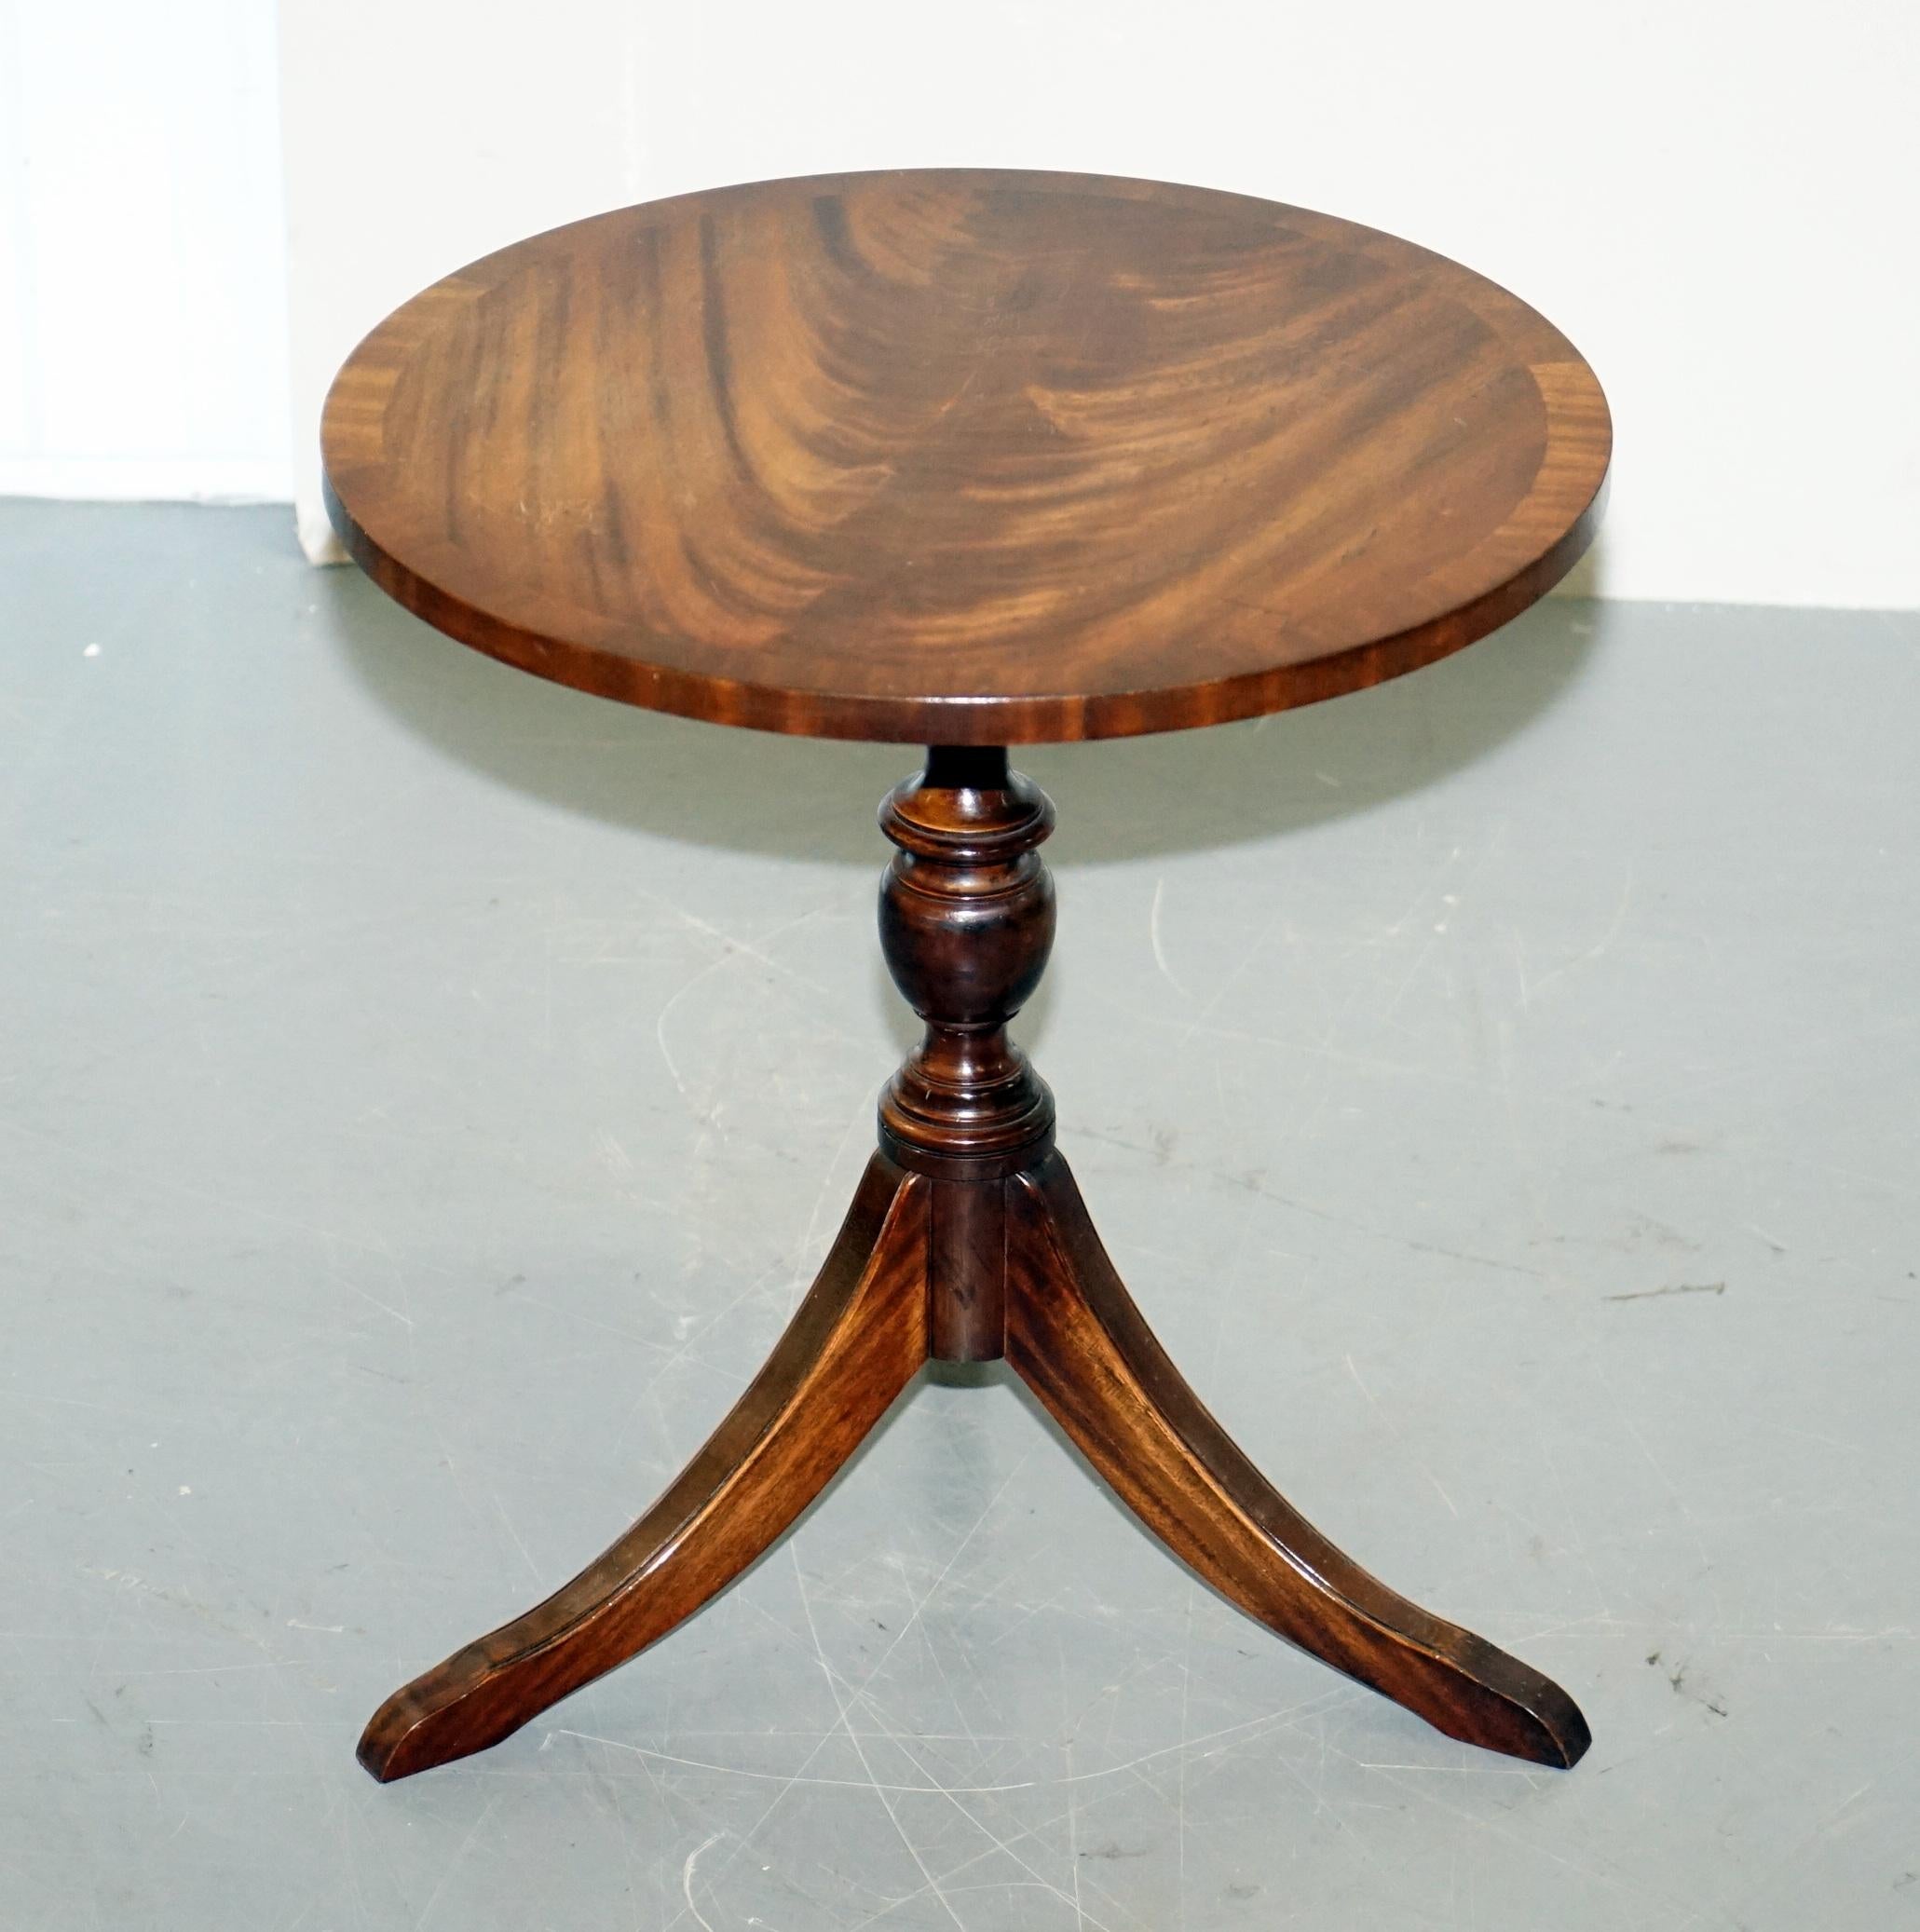 We are delighted to this lovely Bevan Funnell flamed mahogany Regency style side table

A very good looking and well-made piece, the timber patina to the top is glorious

We have cleaned waxed and polished it from top to bottom, it has normal